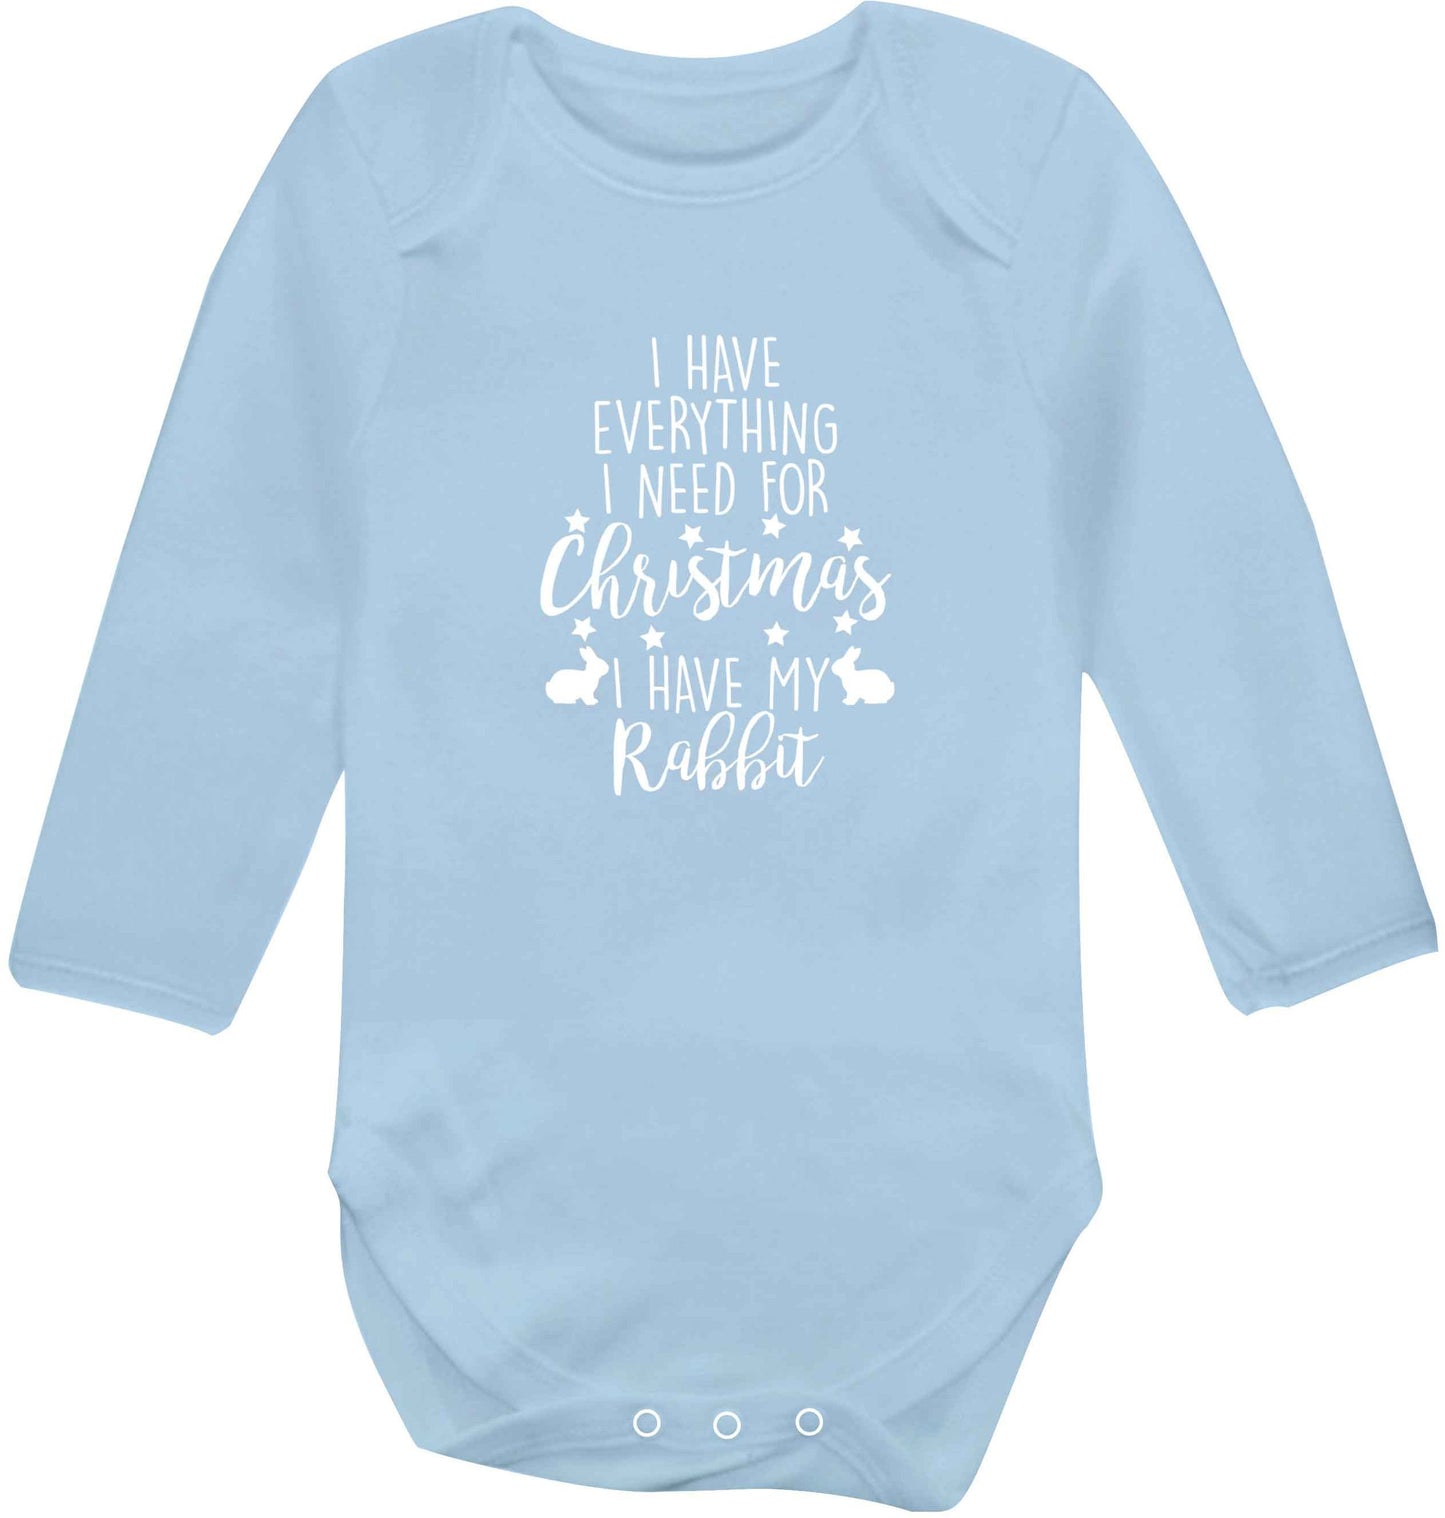 I have everything I need for Christmas I have my rabbit baby vest long sleeved pale blue 6-12 months